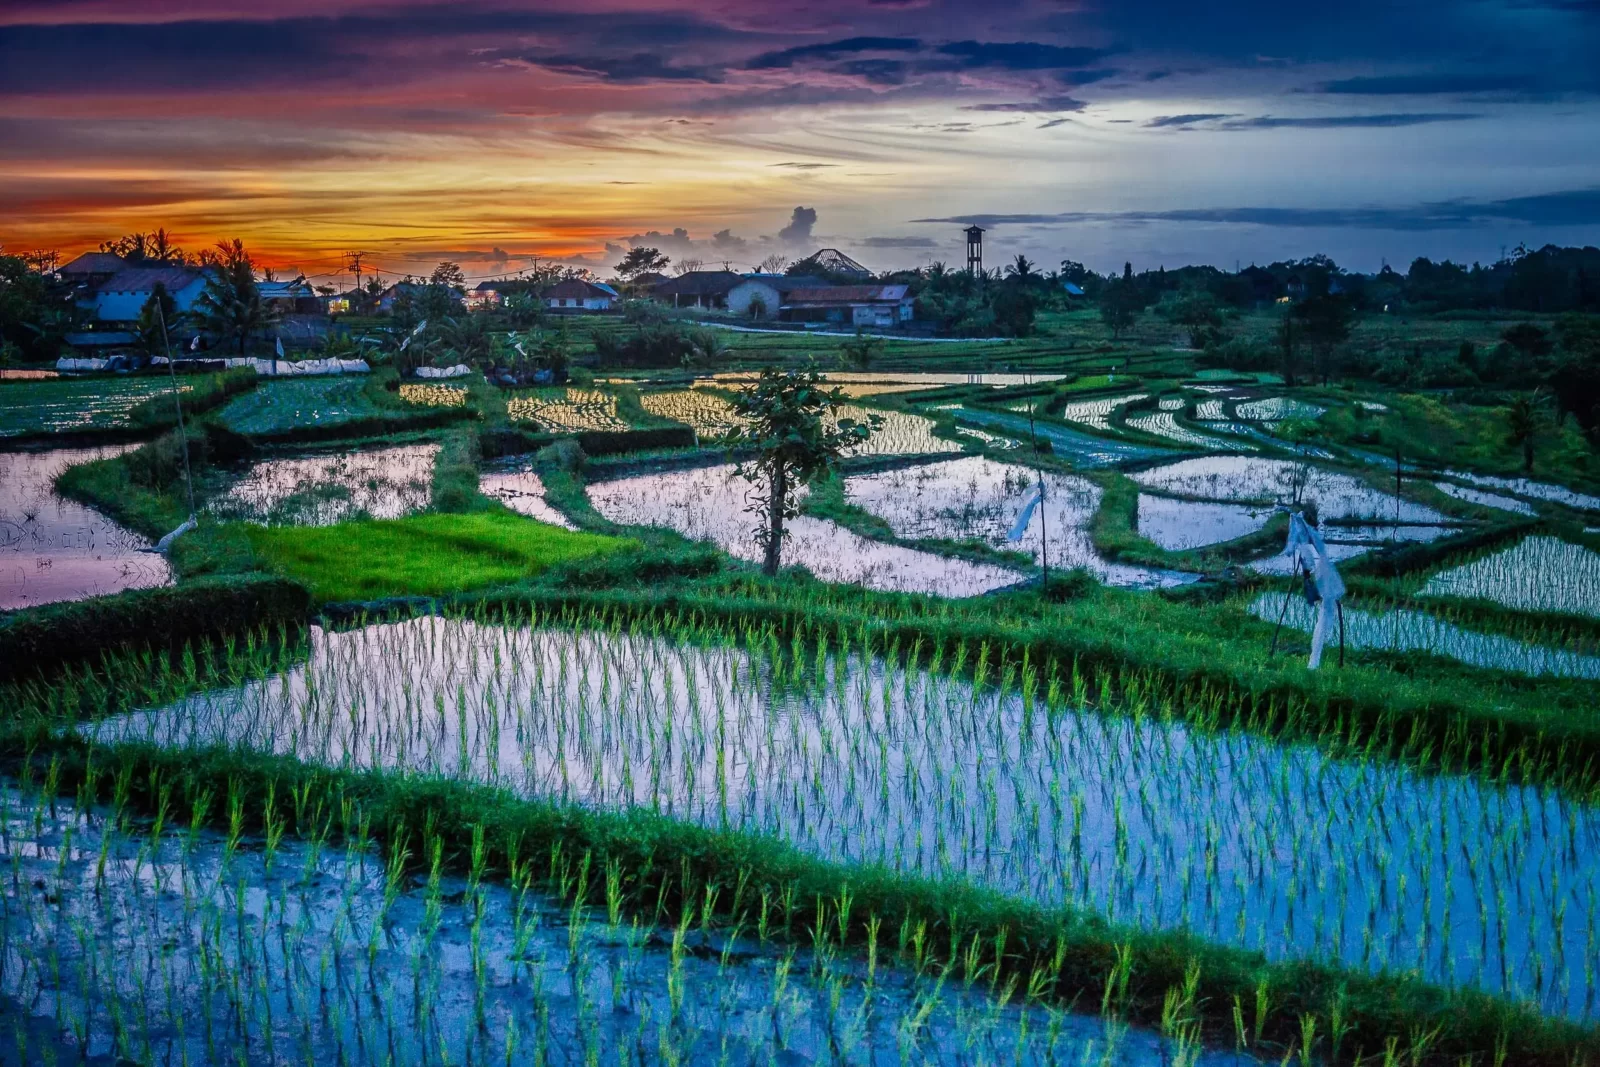 Cities At Sunset Quiz Sunset over rice paddy fields in Bali, Indonesia